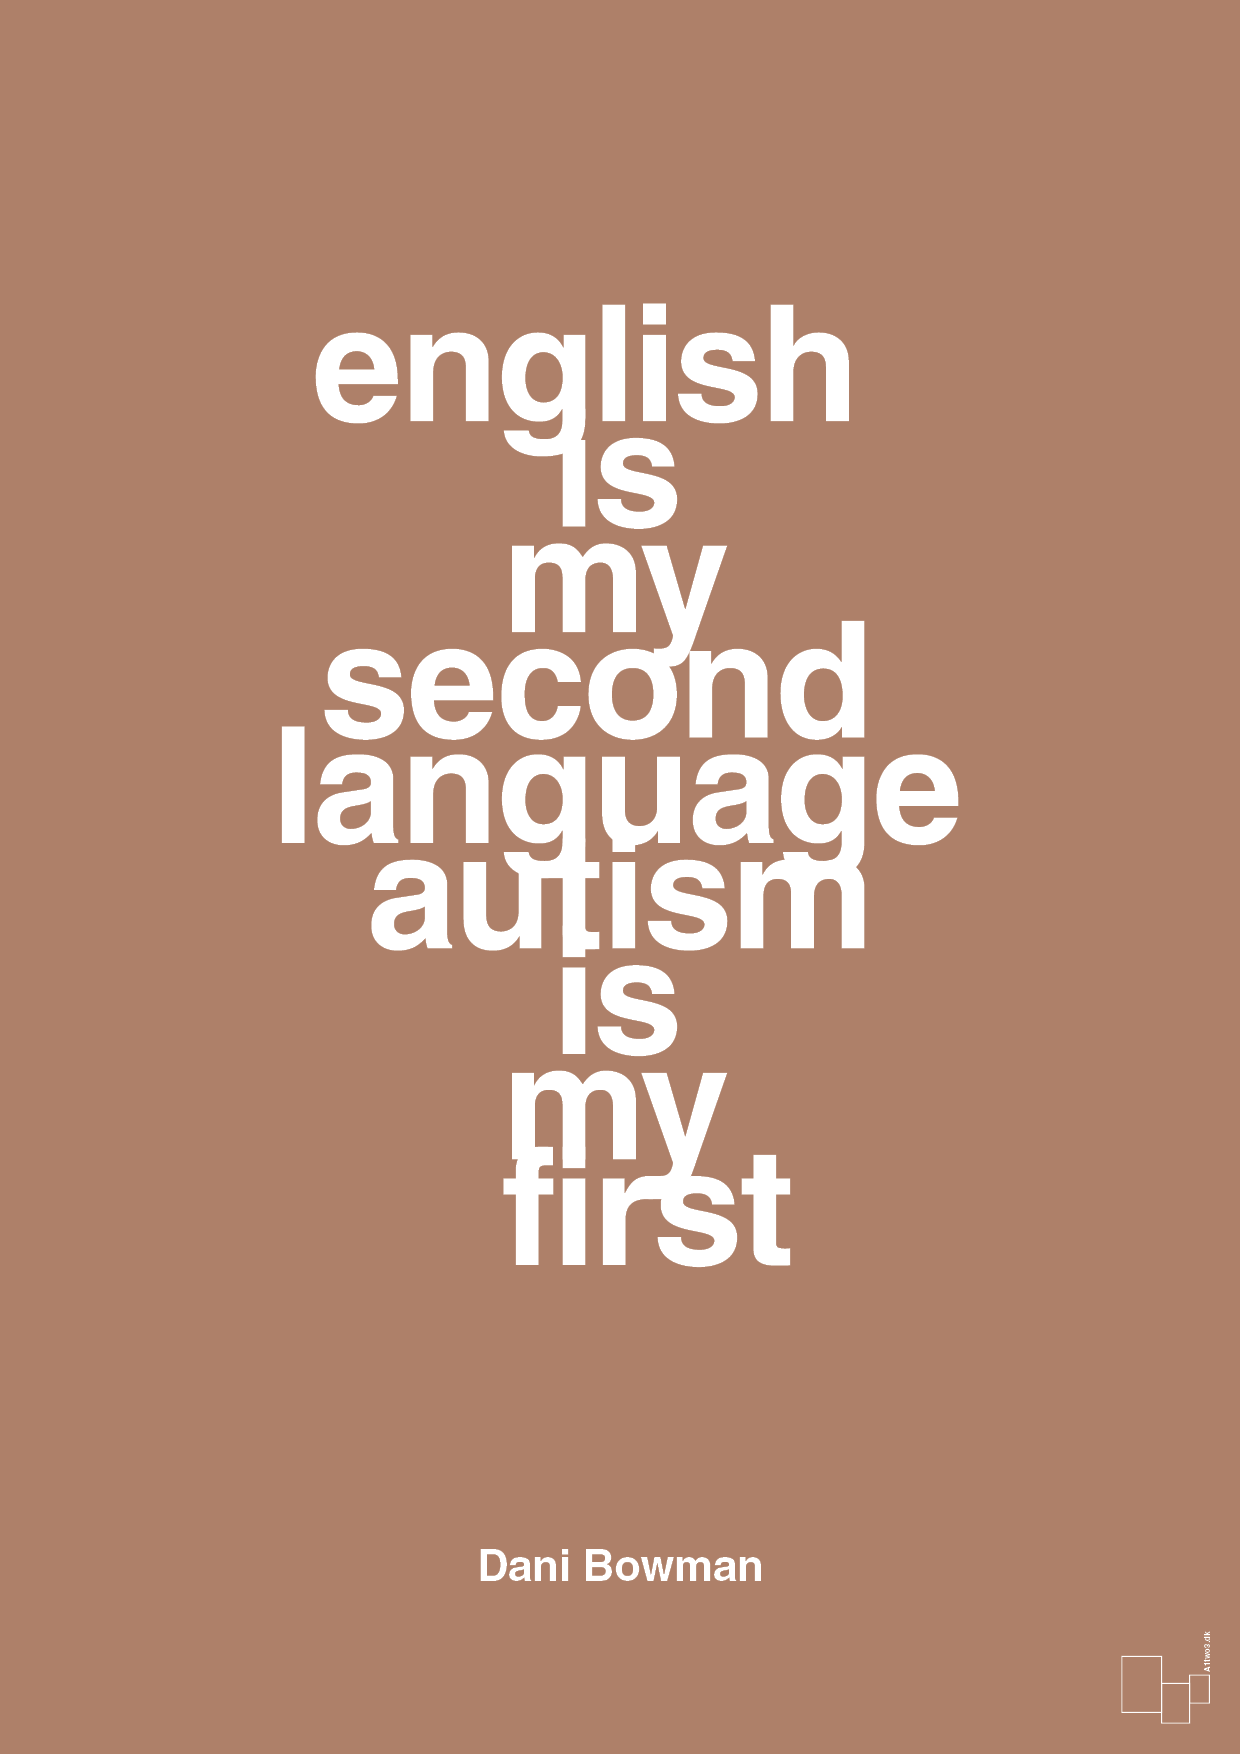 english is my second language autism is my first - Plakat med Samfund i Cider Spice